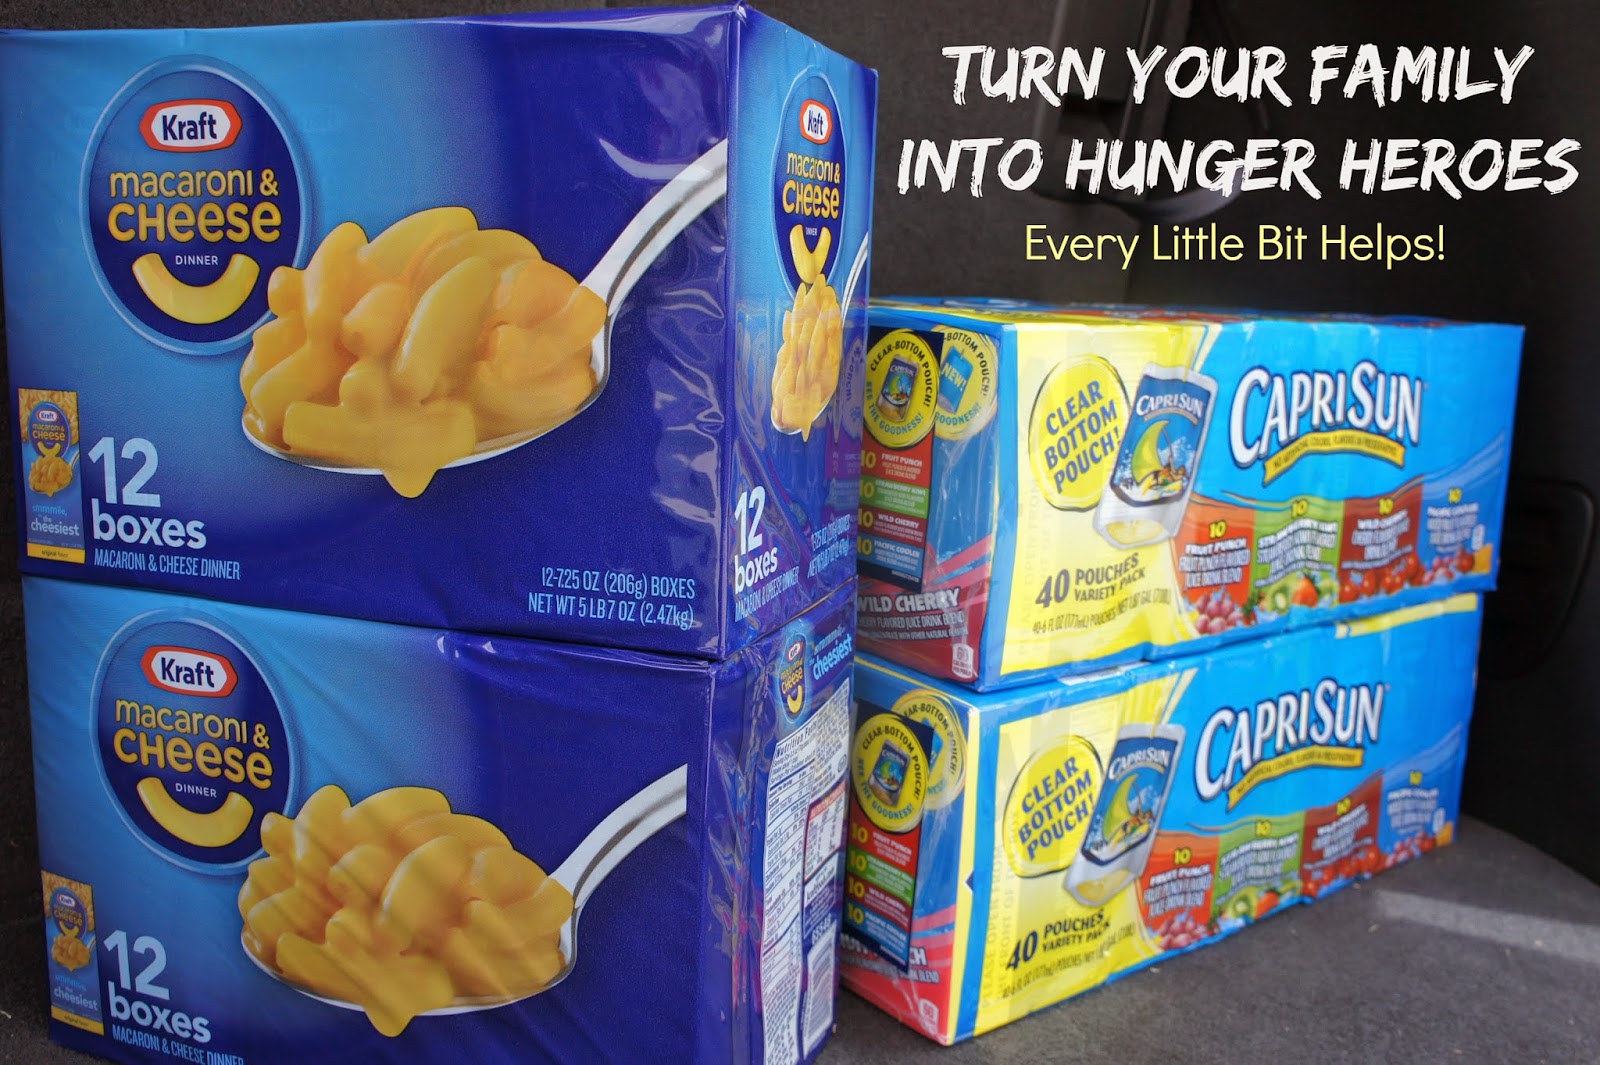 Your family can help fight hunger with Tyson, Kraft, Capri Sun and Sam's